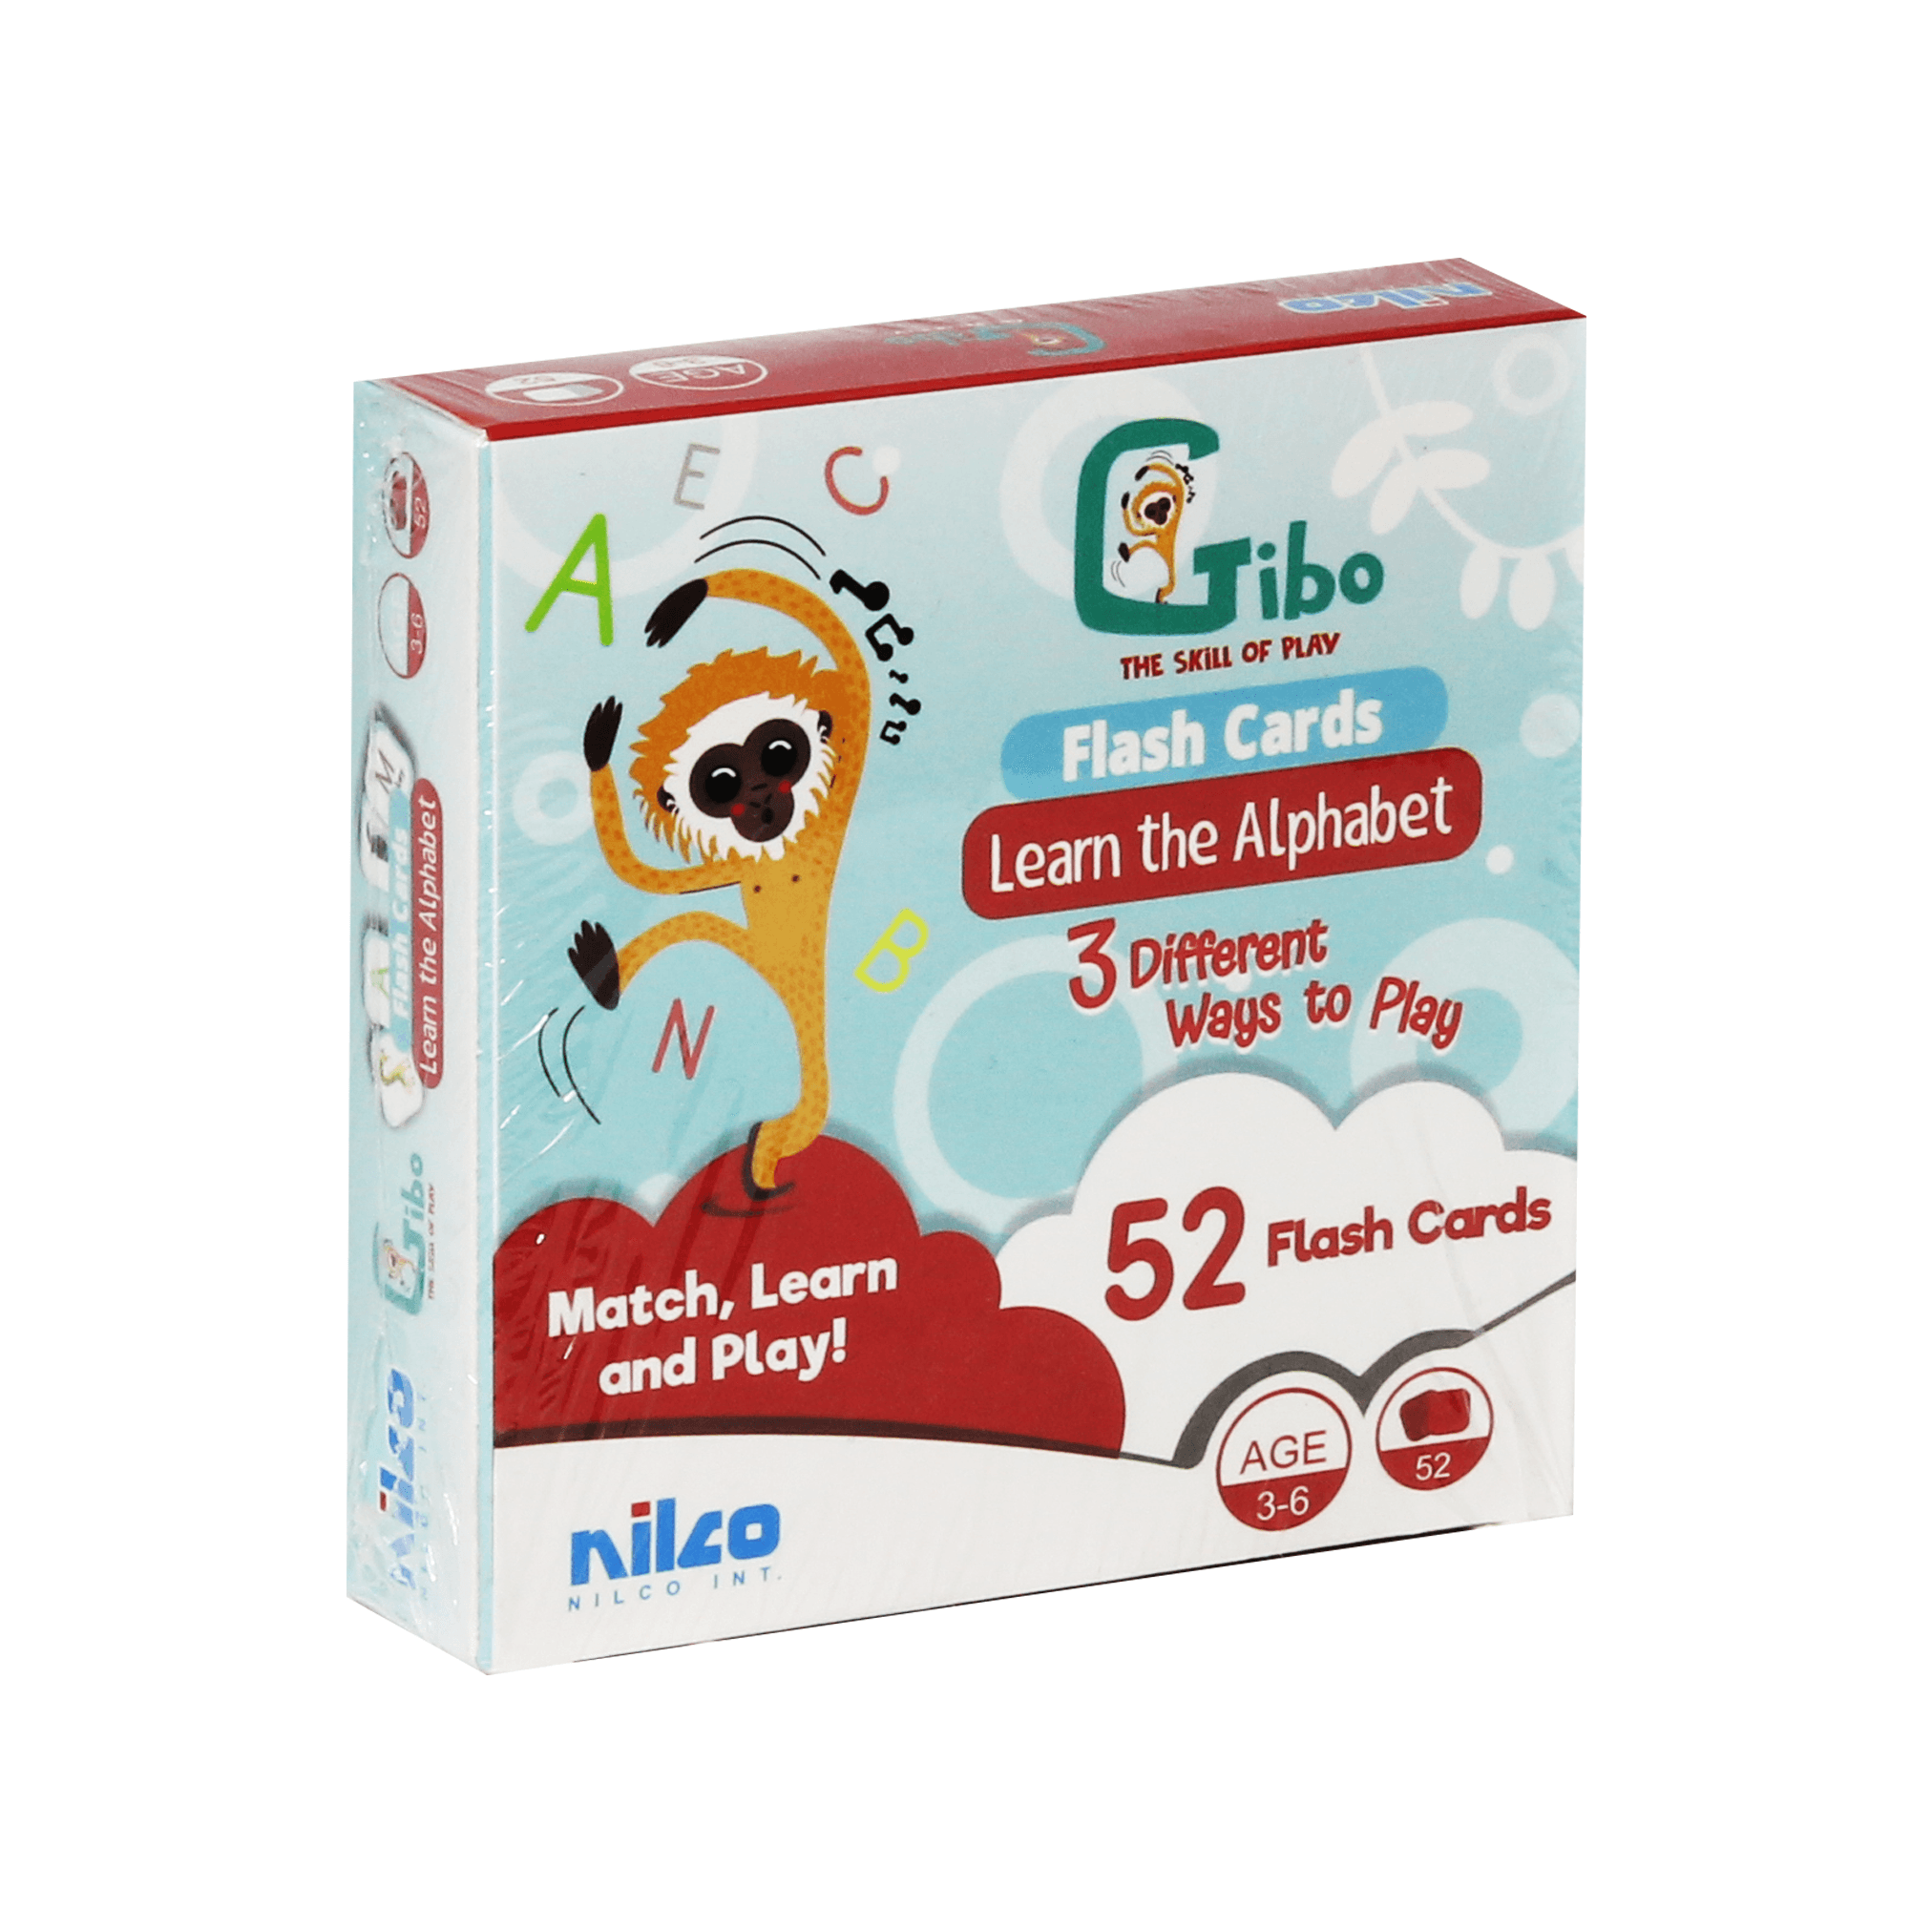 Nilco Gibo Flash Cards Learn The Alphabet Card Game - BumbleToys - 8-13 Years, Card & Board Games, Nilco, Puzzle & Board & Card Games, Unisex